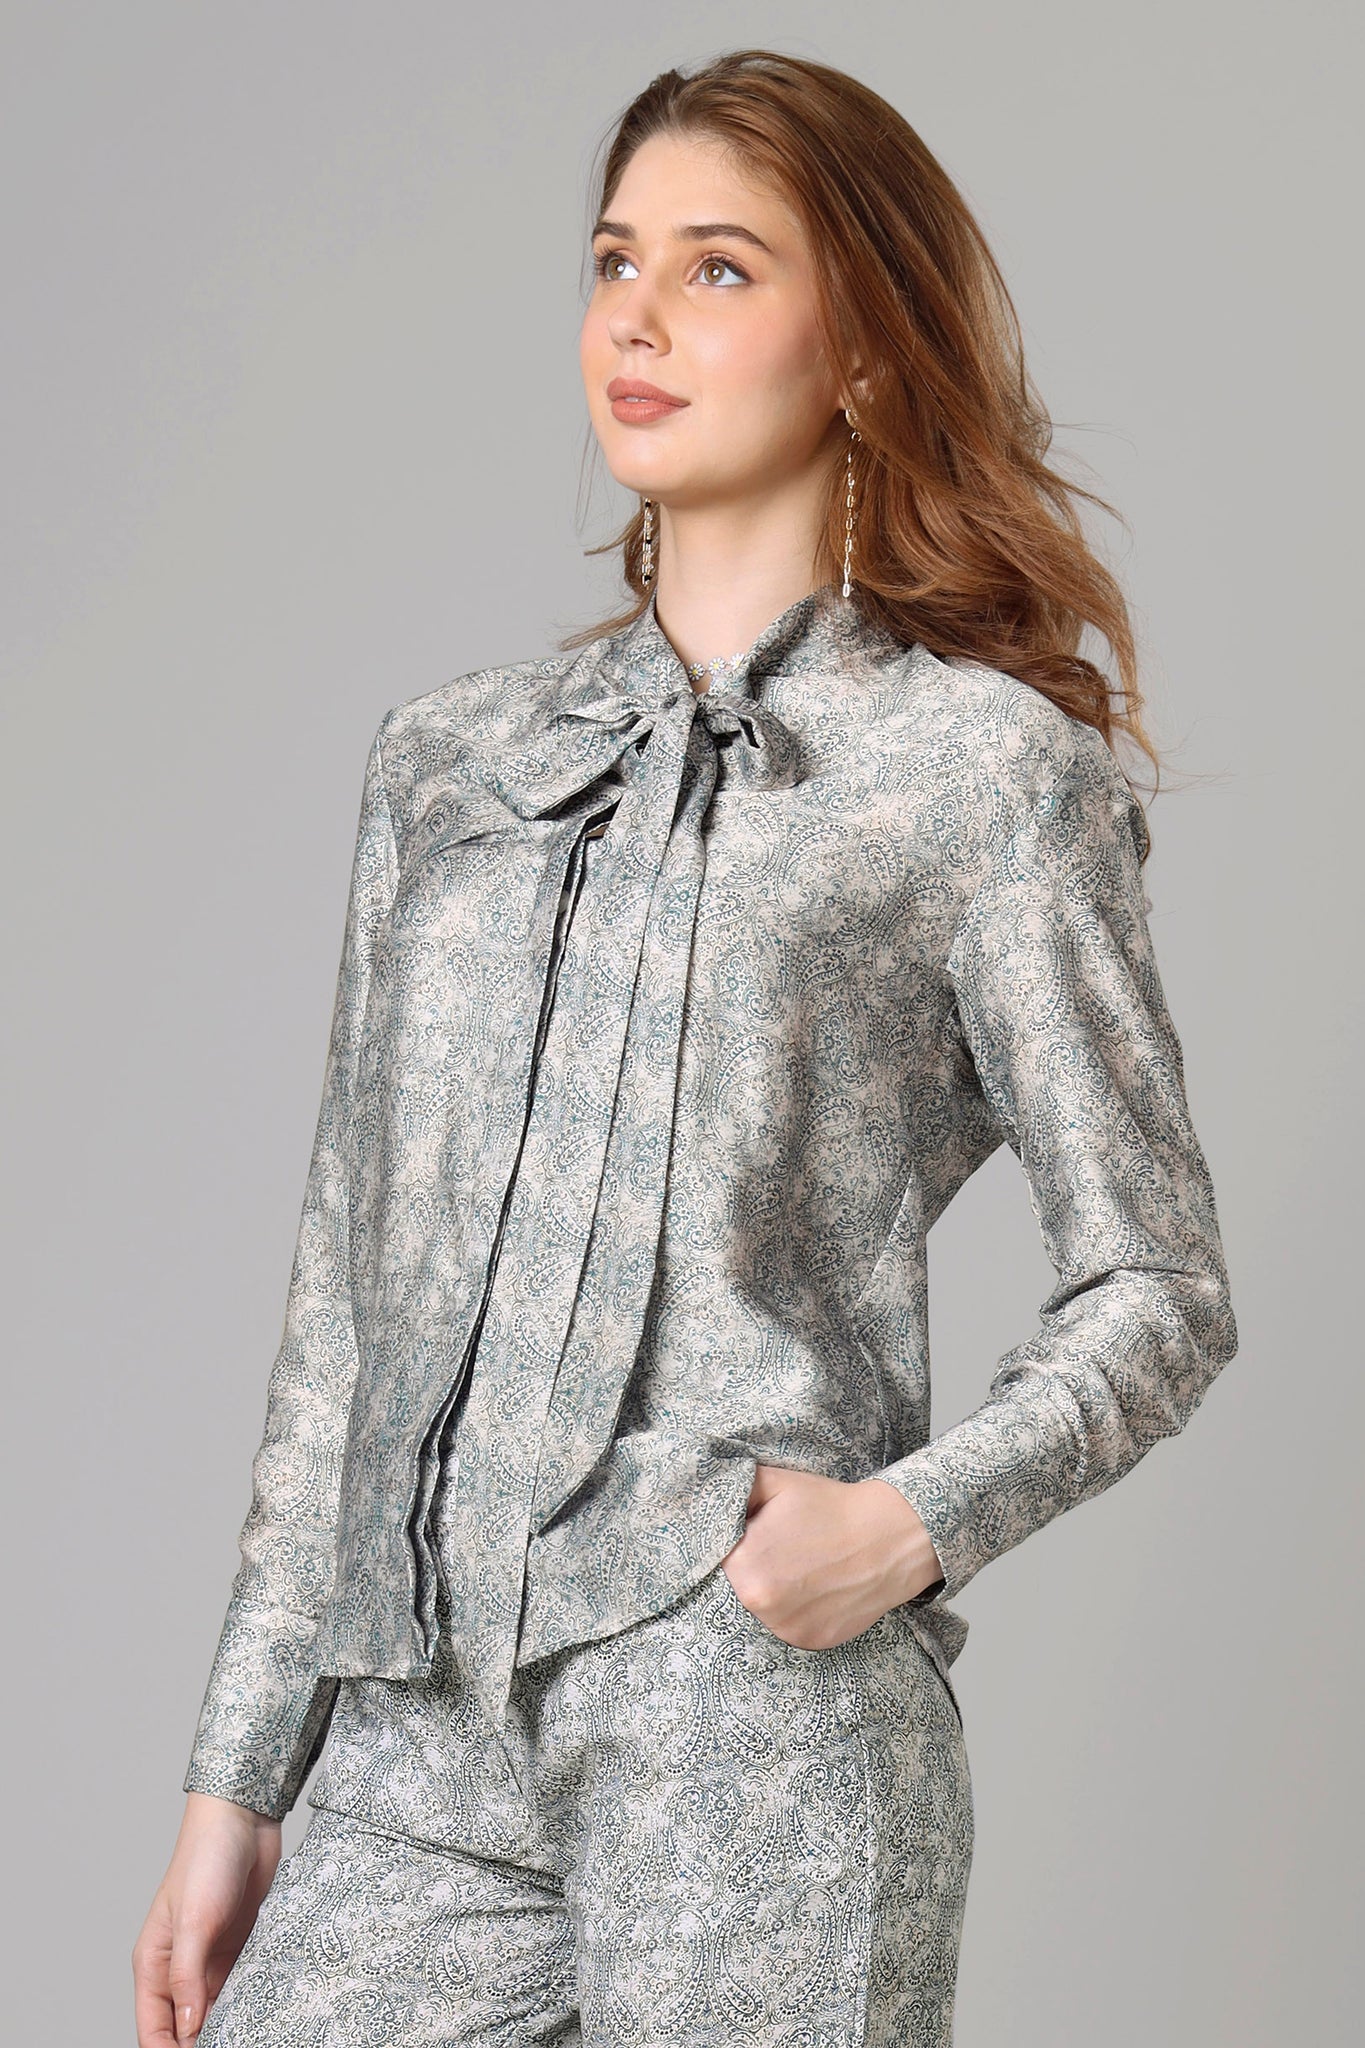 Seamless Paisley Tie-Up Neck Shirt For Women